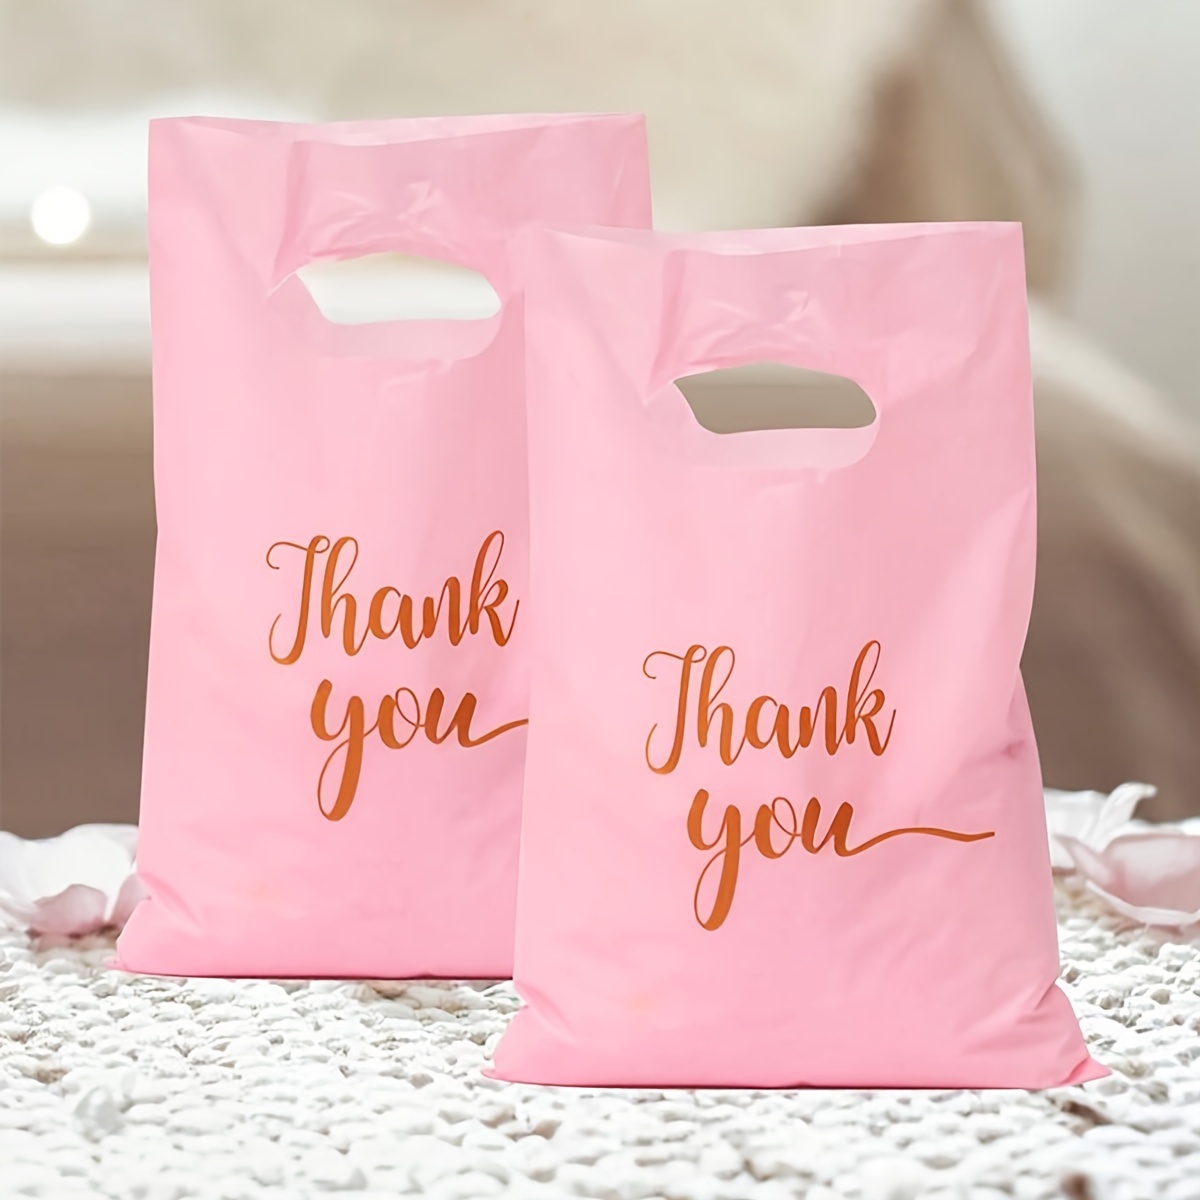 

24pcs, Pink Thank You Pattern Gift Packaging Bags, Modern Gift Bags For Parties, Shopping Bags For Gift Bags, Shopping Bags, Retailer Bags, Goods Bags